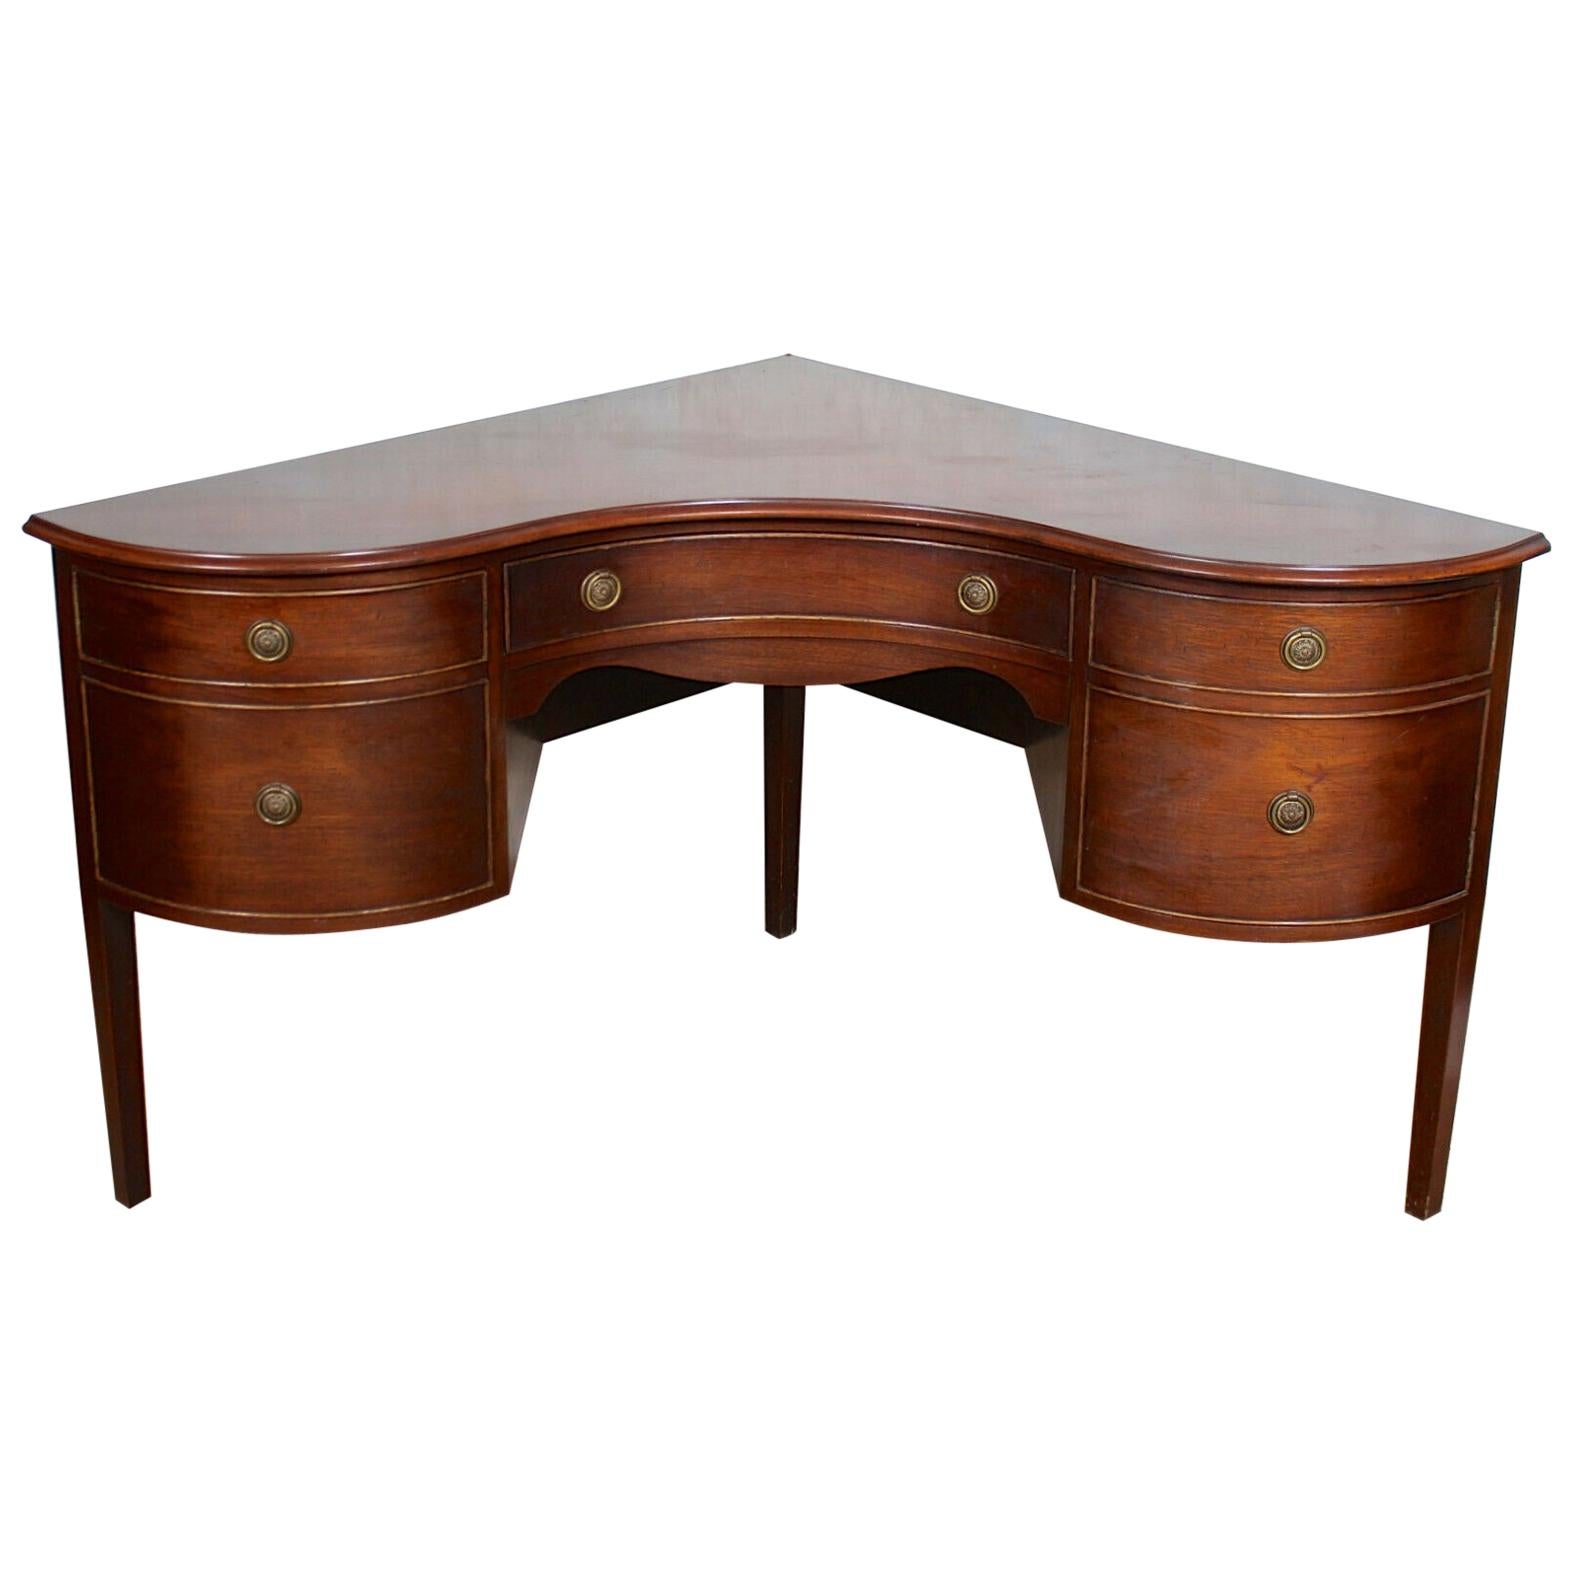 English Corner Desk Writing Table Bevan Funnell Mahogany Antique Vintage For Sale